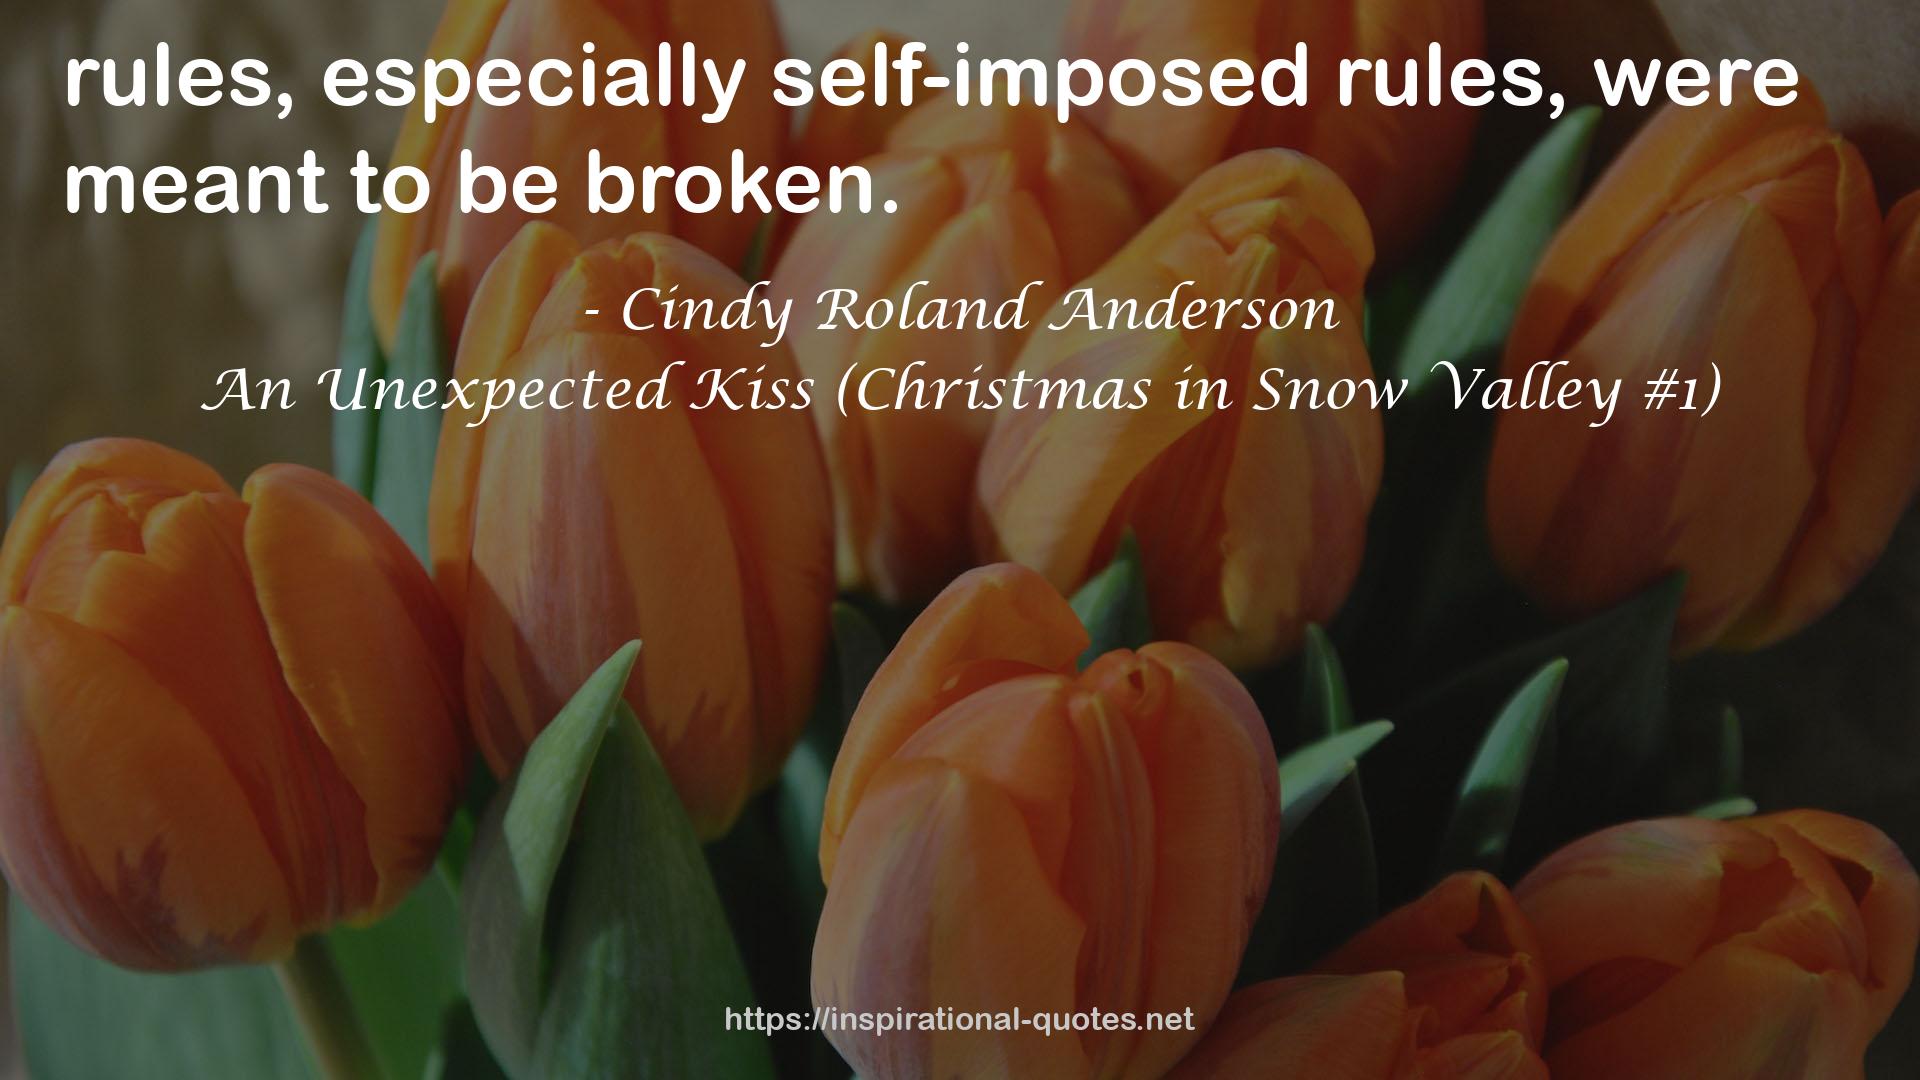 An Unexpected Kiss (Christmas in Snow Valley #1) QUOTES